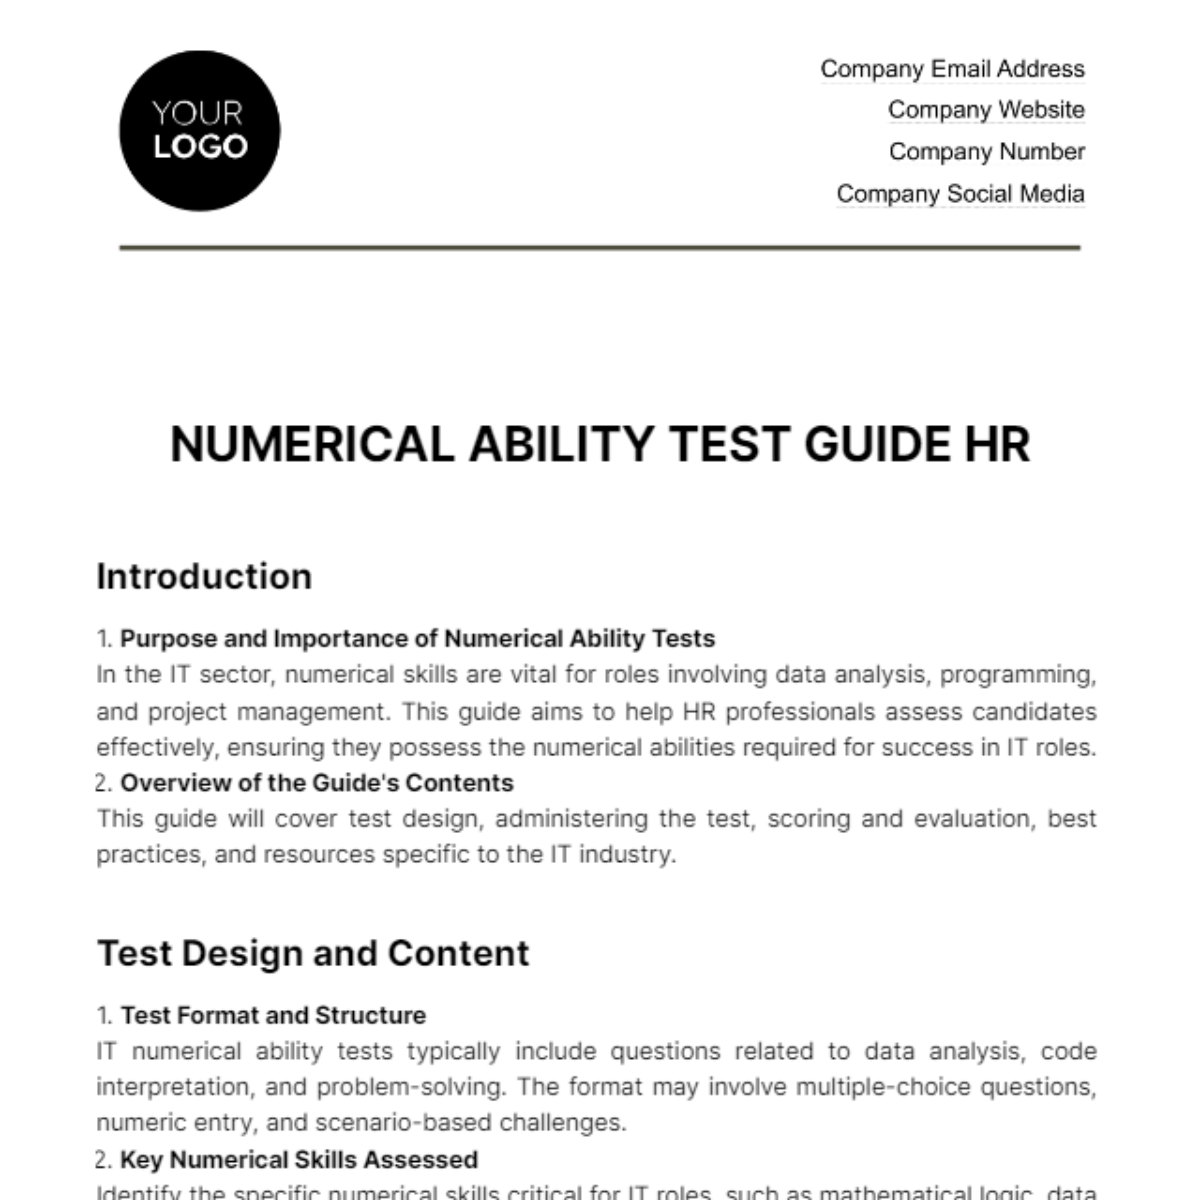 Free Numerical Ability Test Guide HR Template